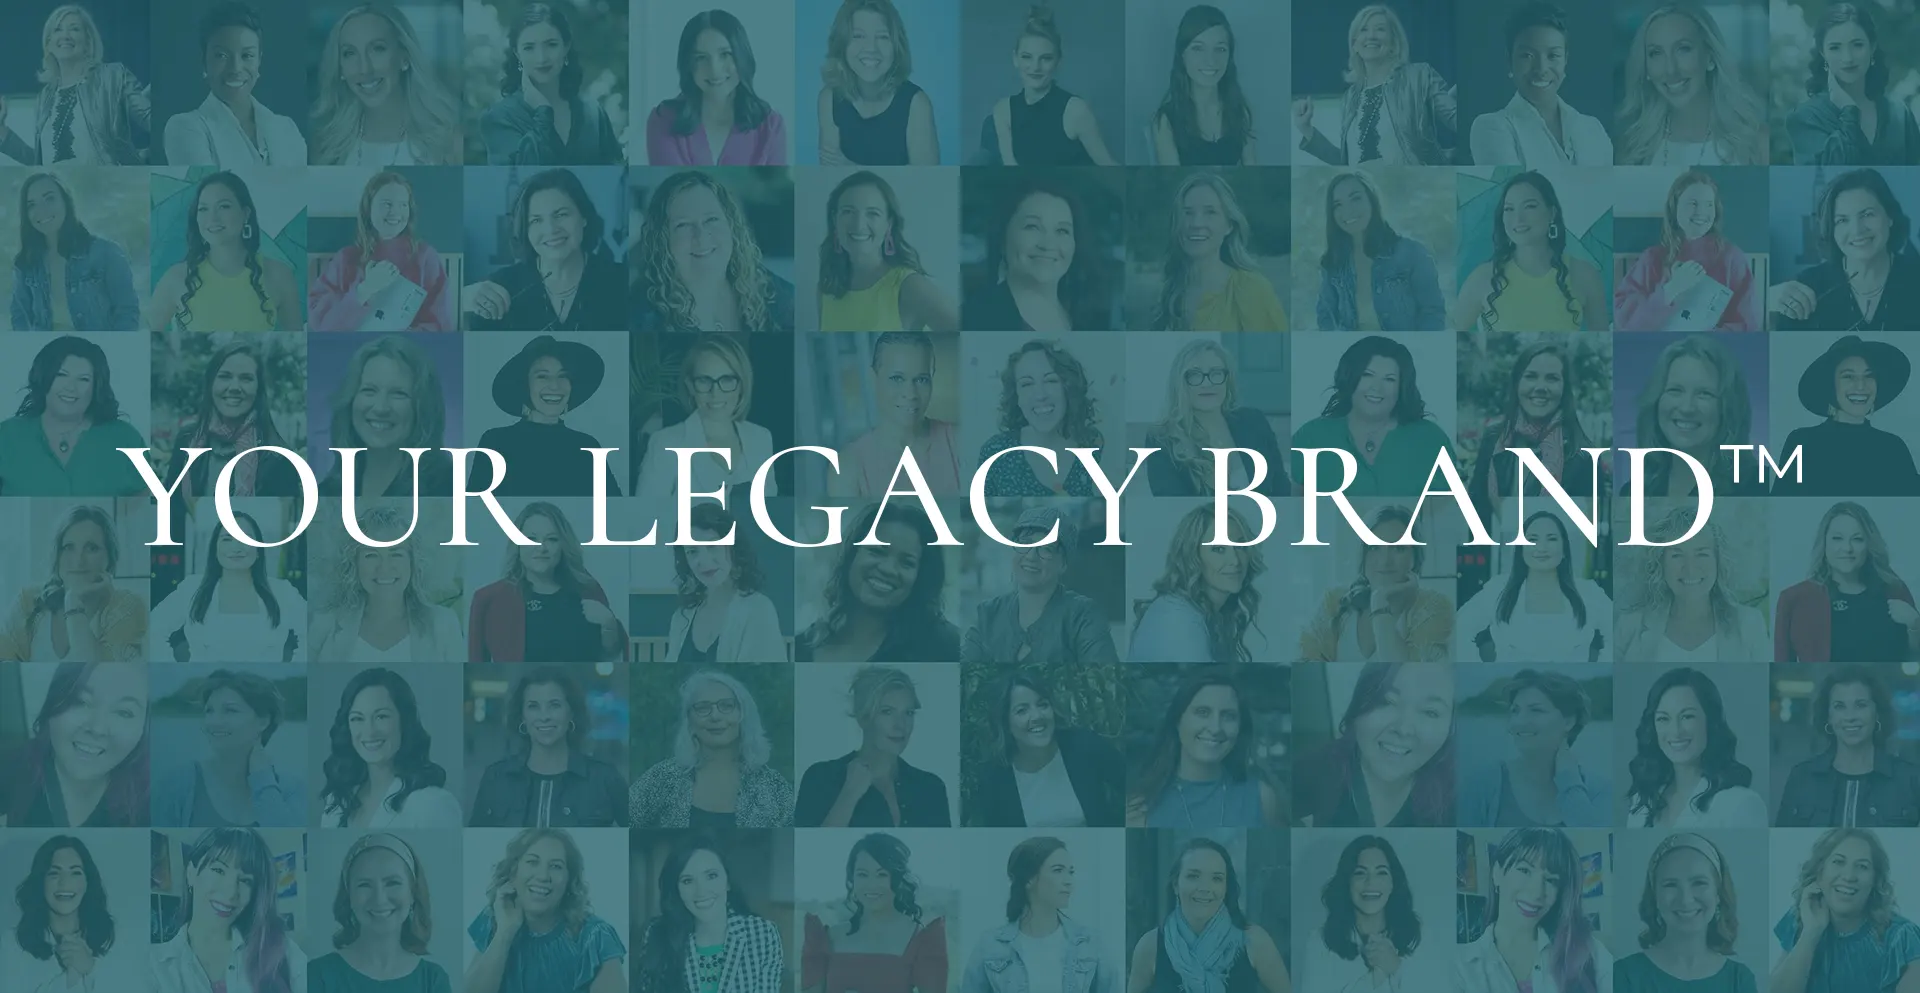 Home - Your Legacy Brand